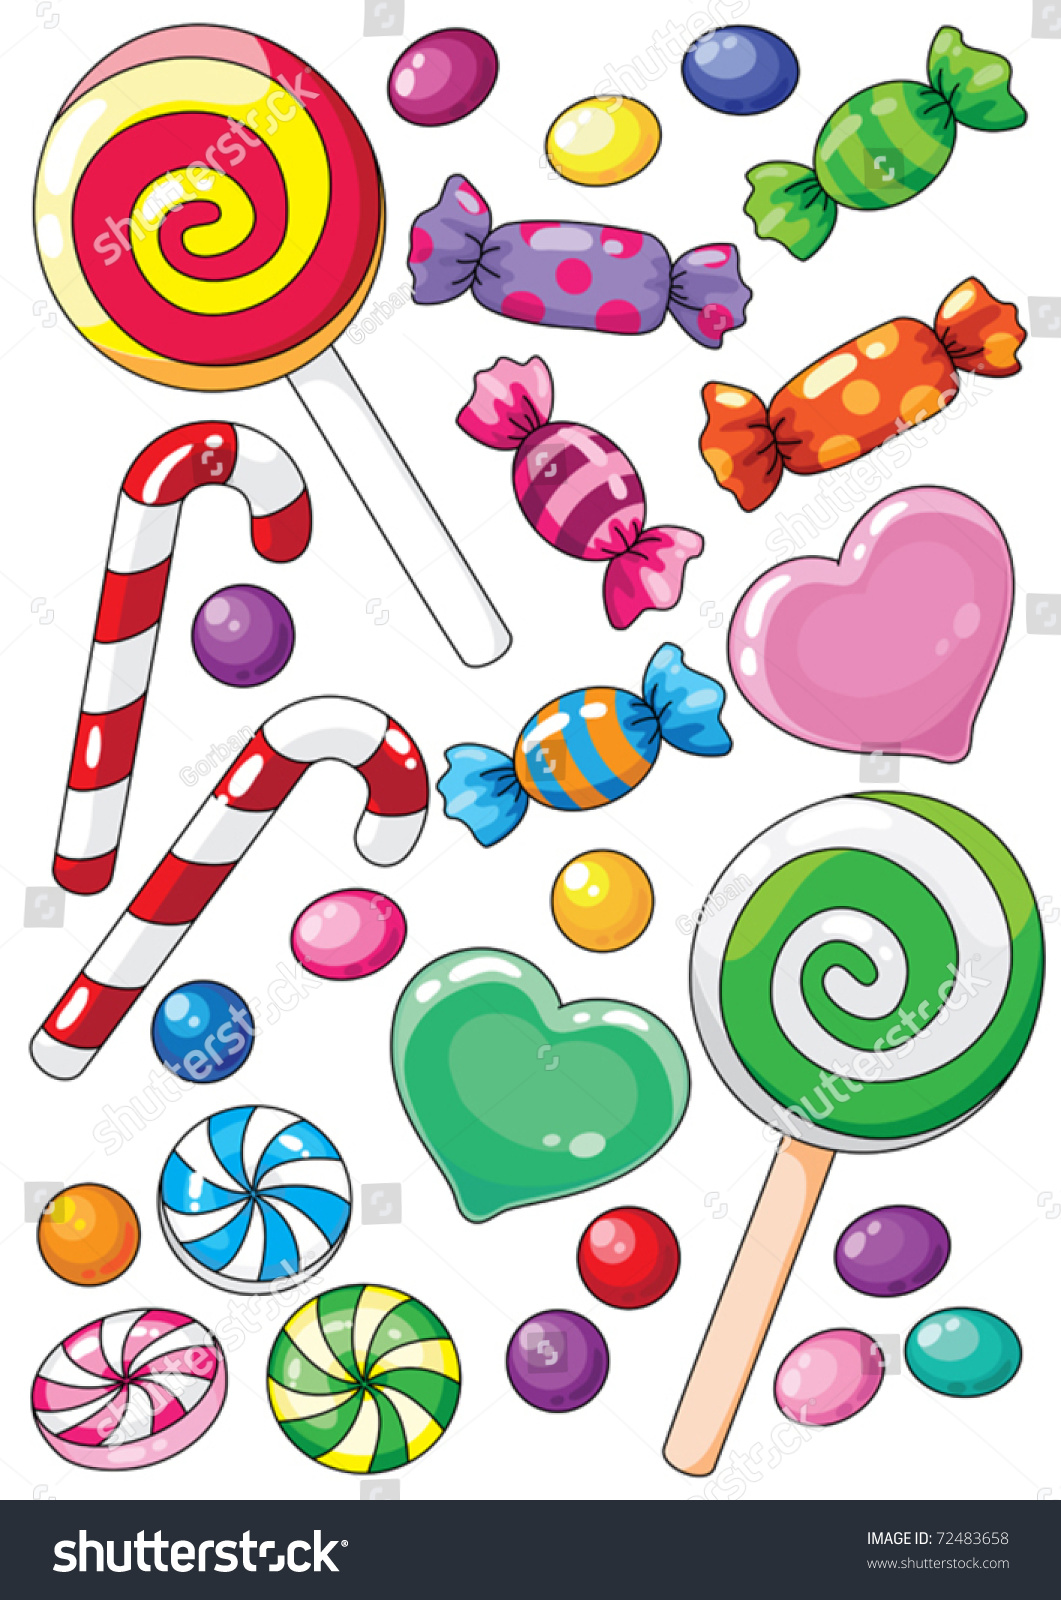 Cute as Candy Illustration Stickers 001